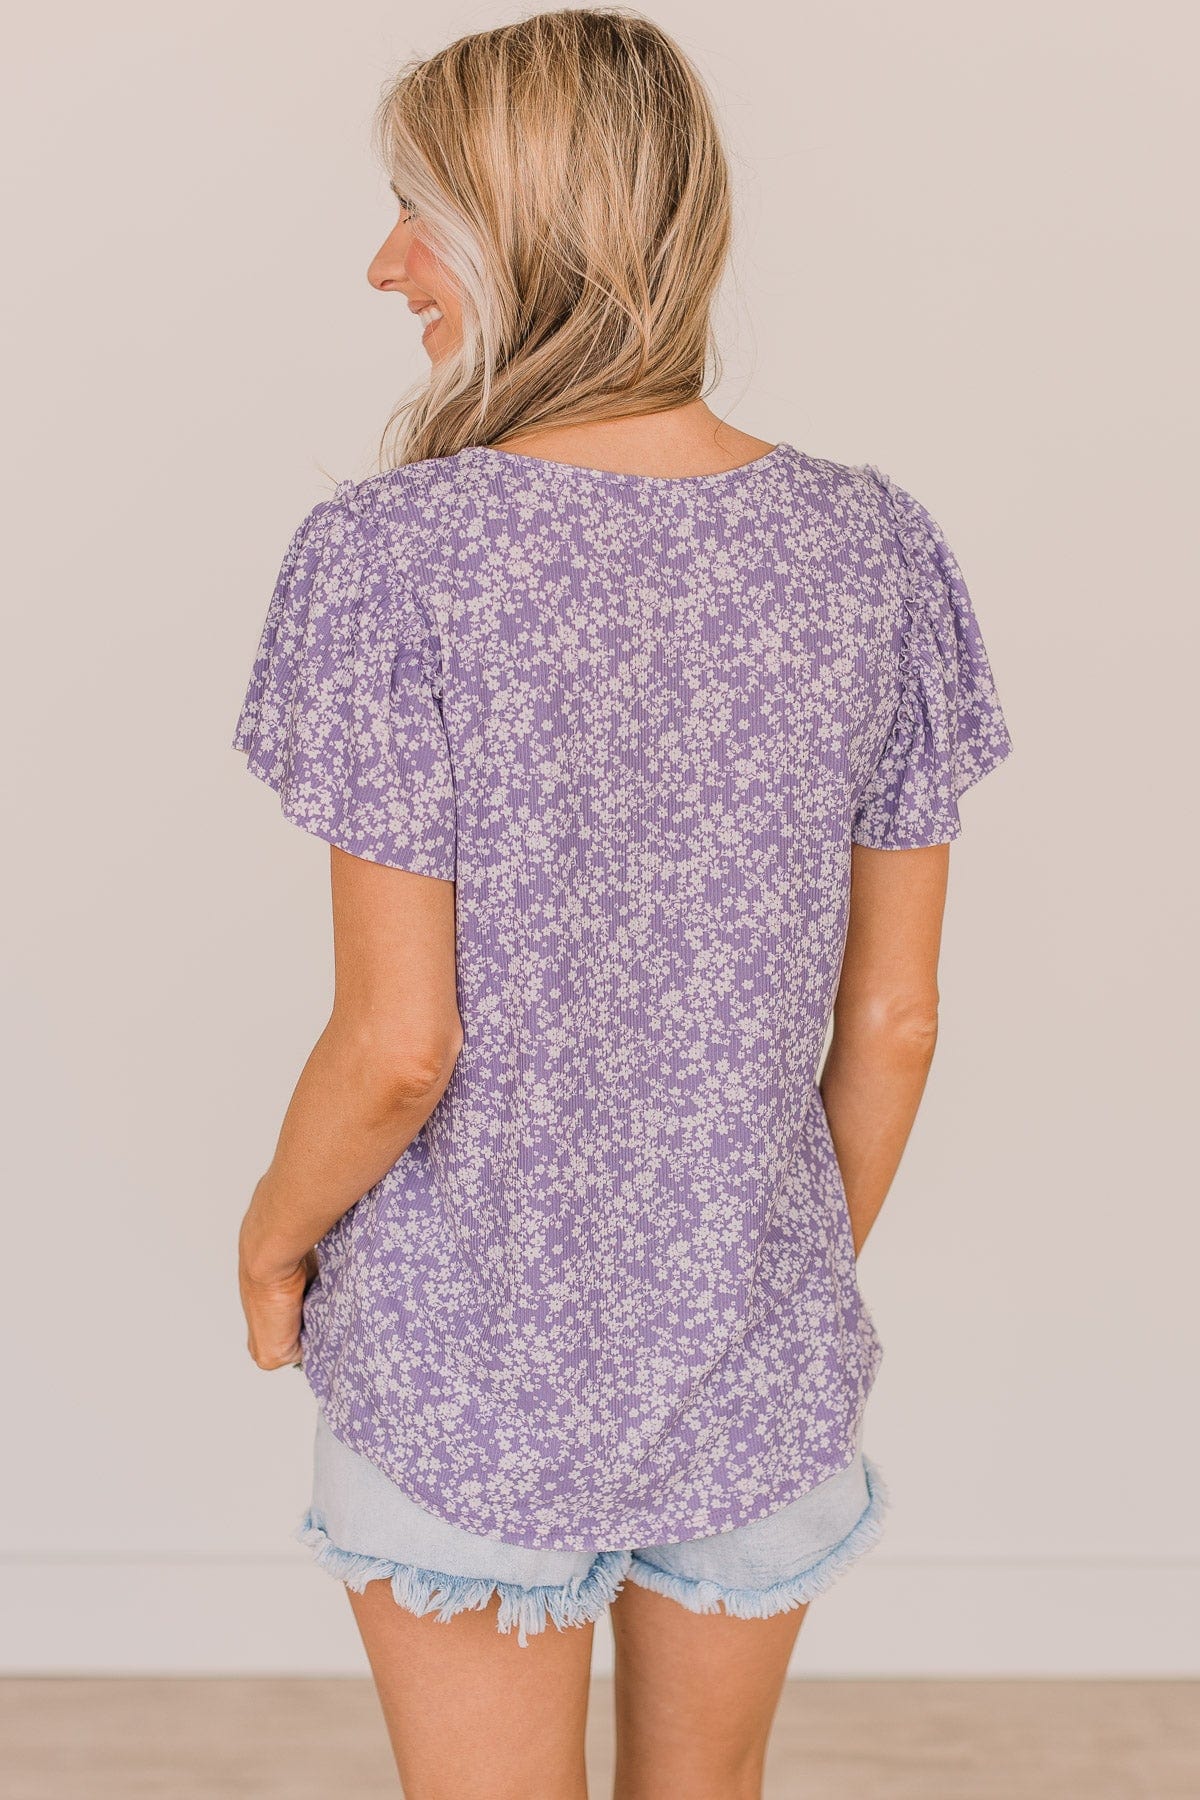 Live For The Highlights Floral Top- Purple